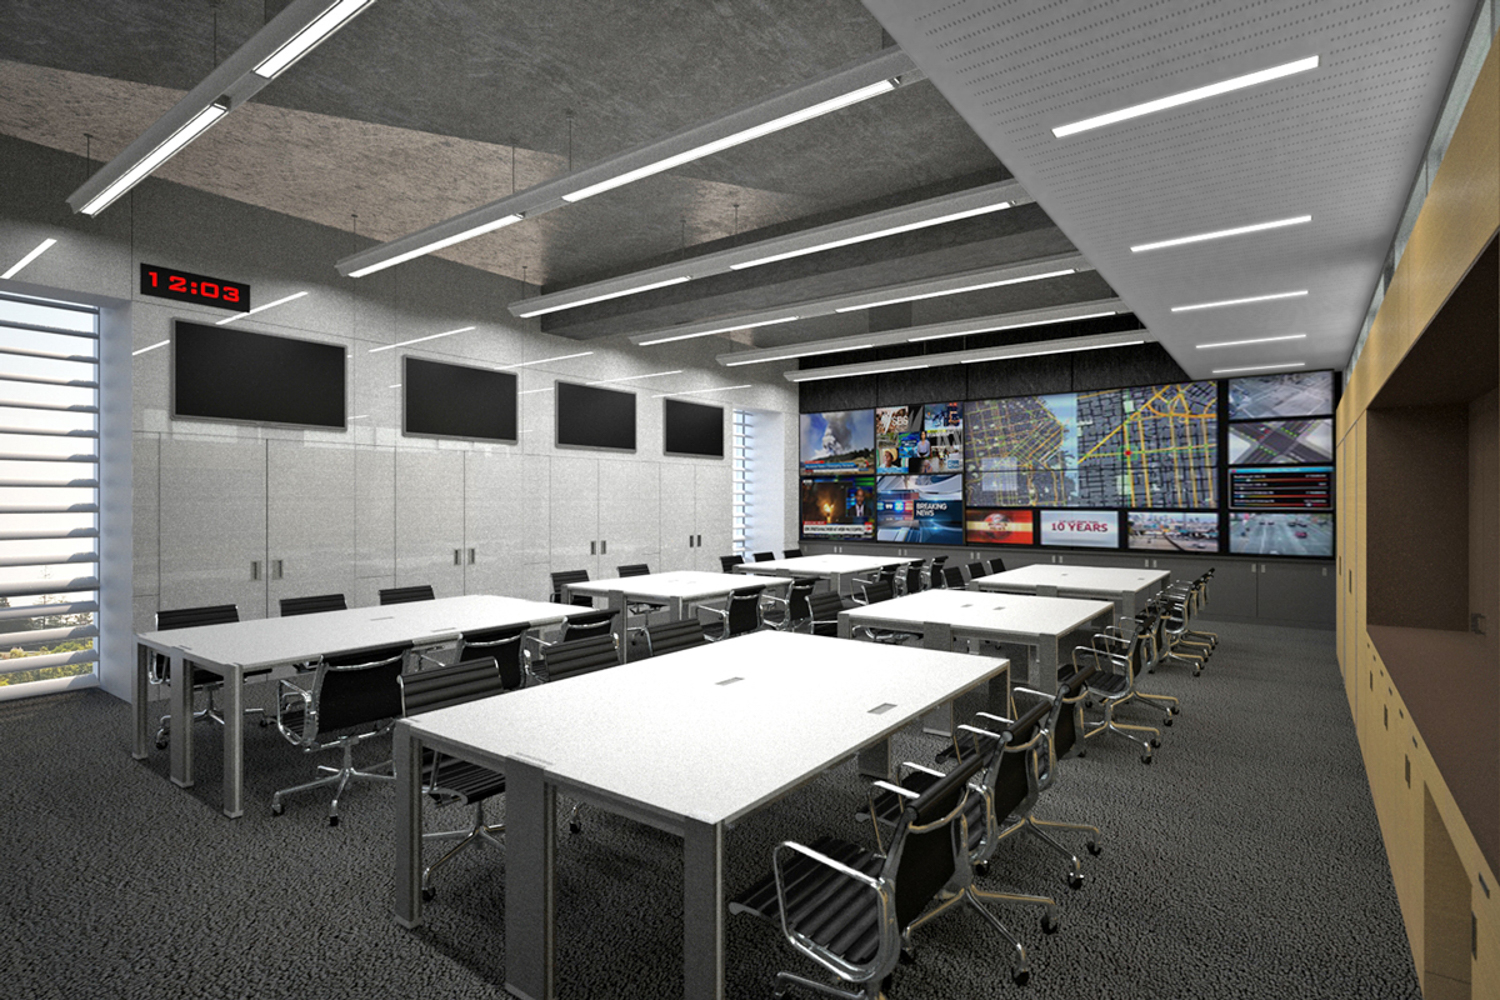 Palo Alto Public Safety Building office interior, rendering by Ross Drulis Cusenbery Architecture